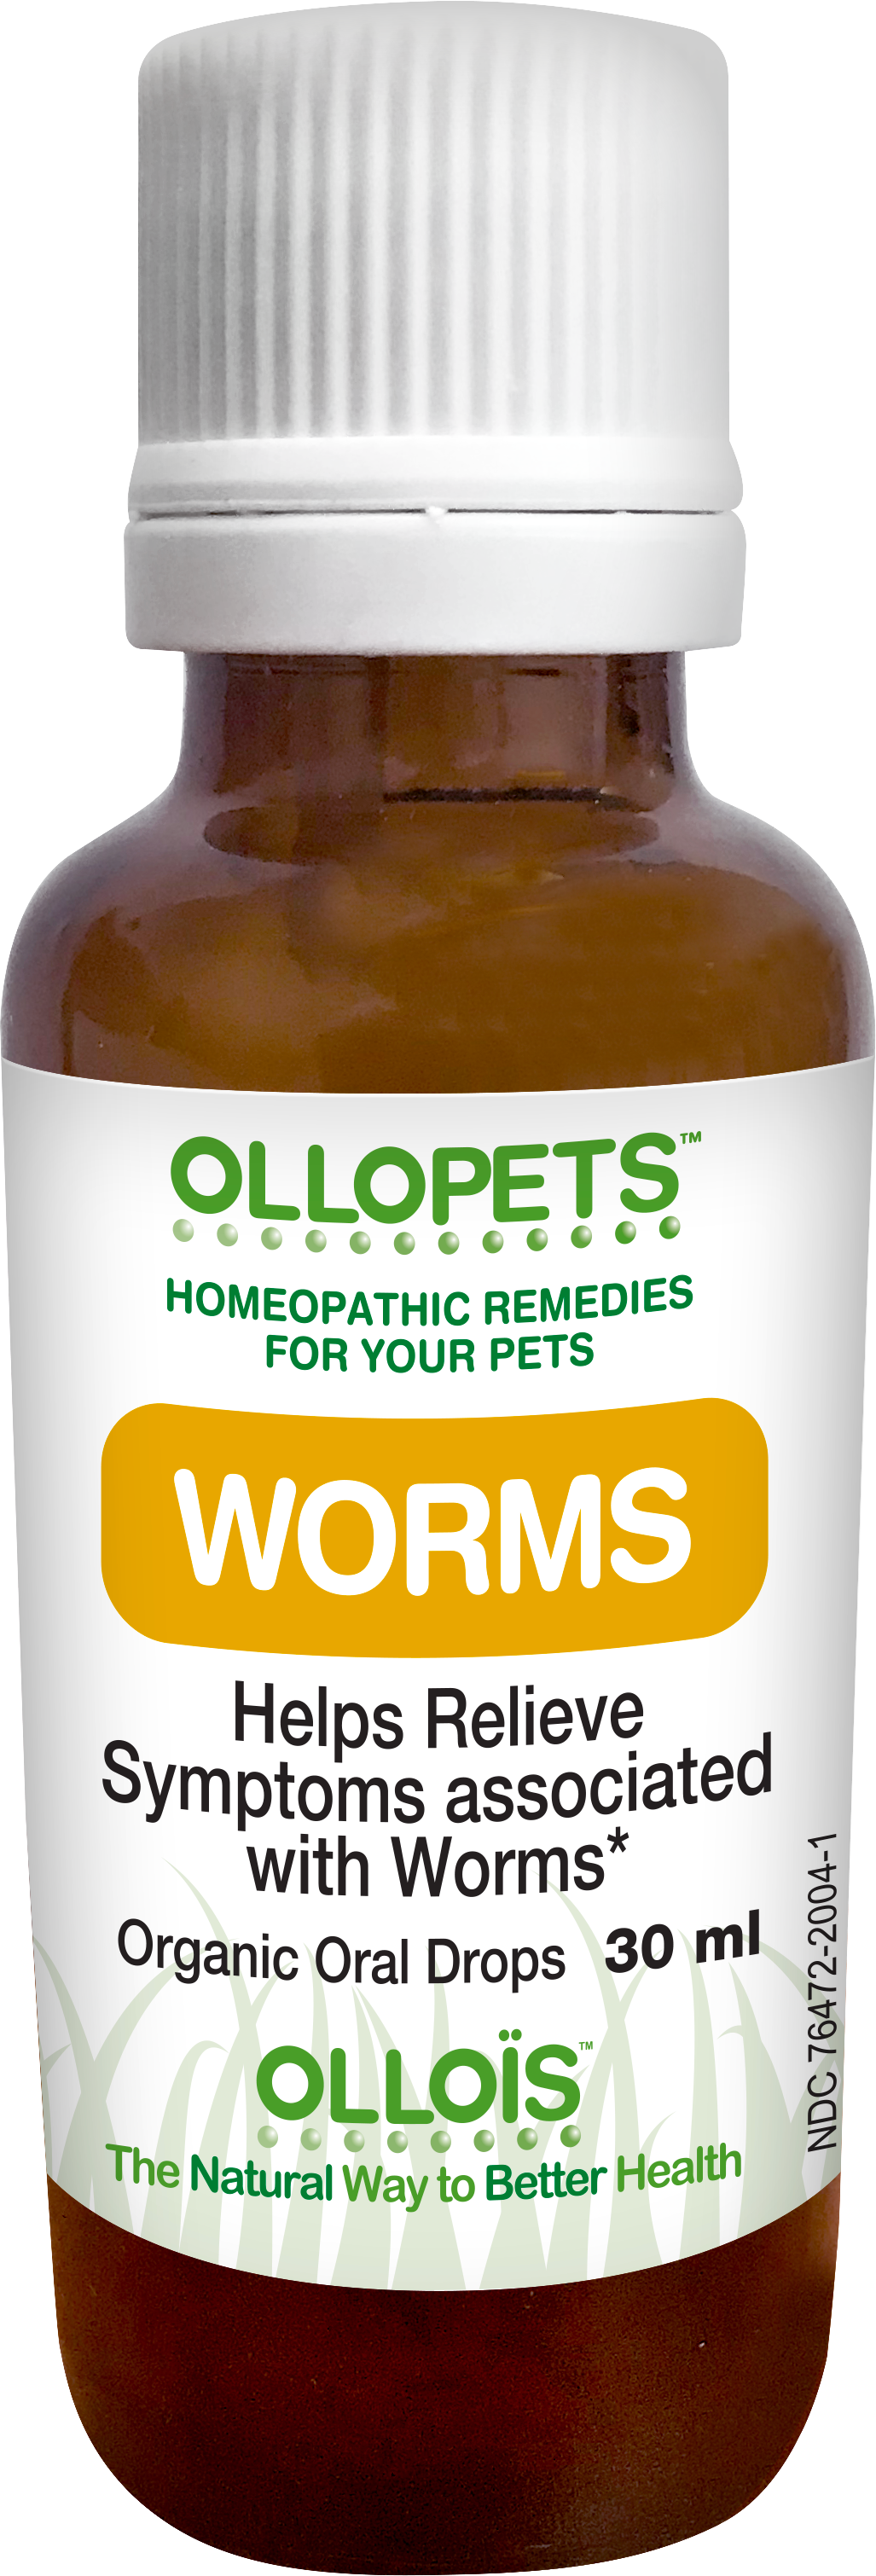 Ollopets Worms